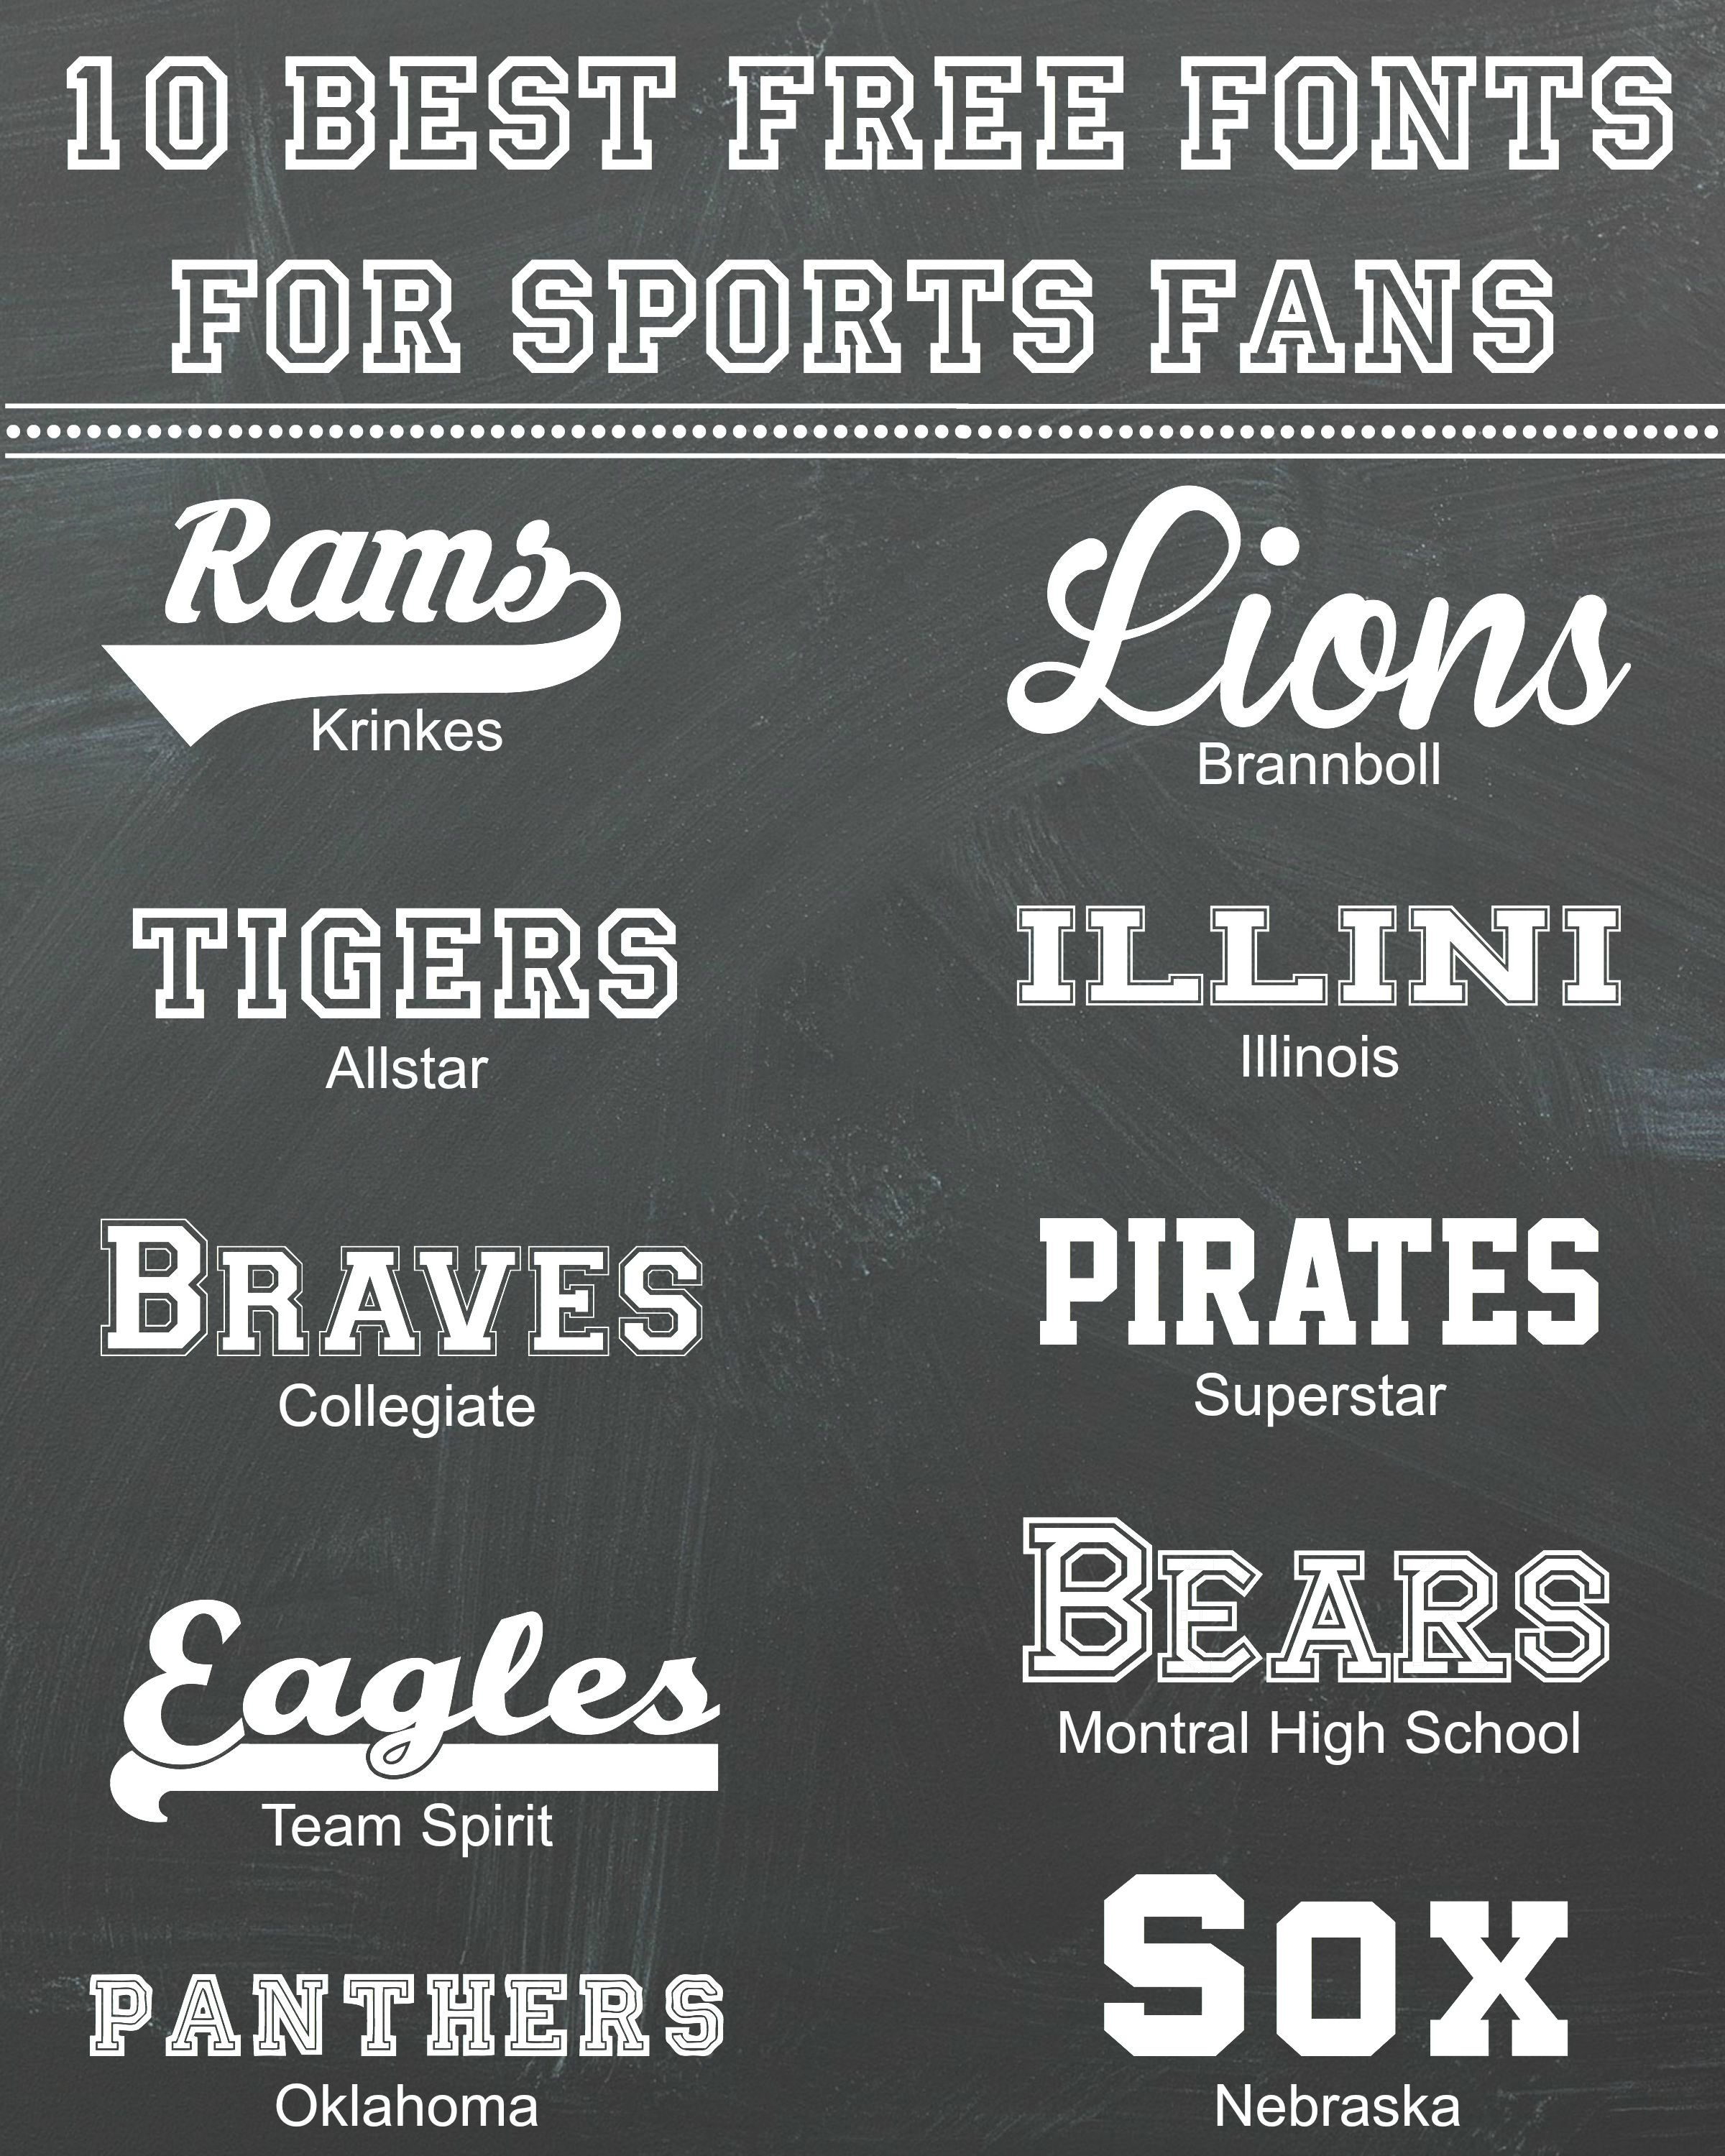 10 Best Free Fonts for Sports Fans - Rosewood and Grace